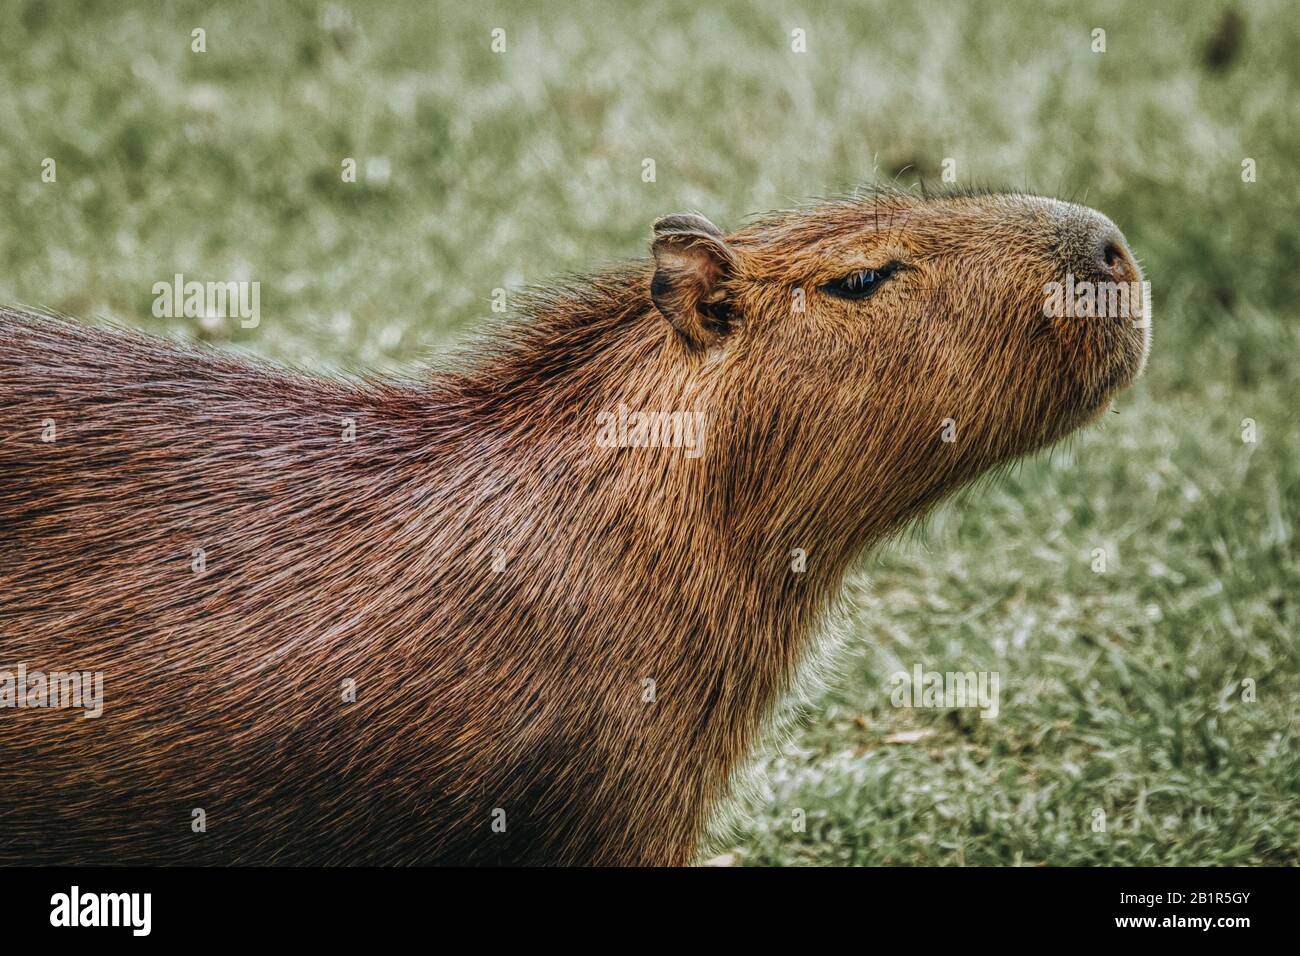 Side head portrait of a wild capybara or Hydrochoerus hydrochaeris, the largest semi-aquatic rodent in the world against a green grass background Stock Photo